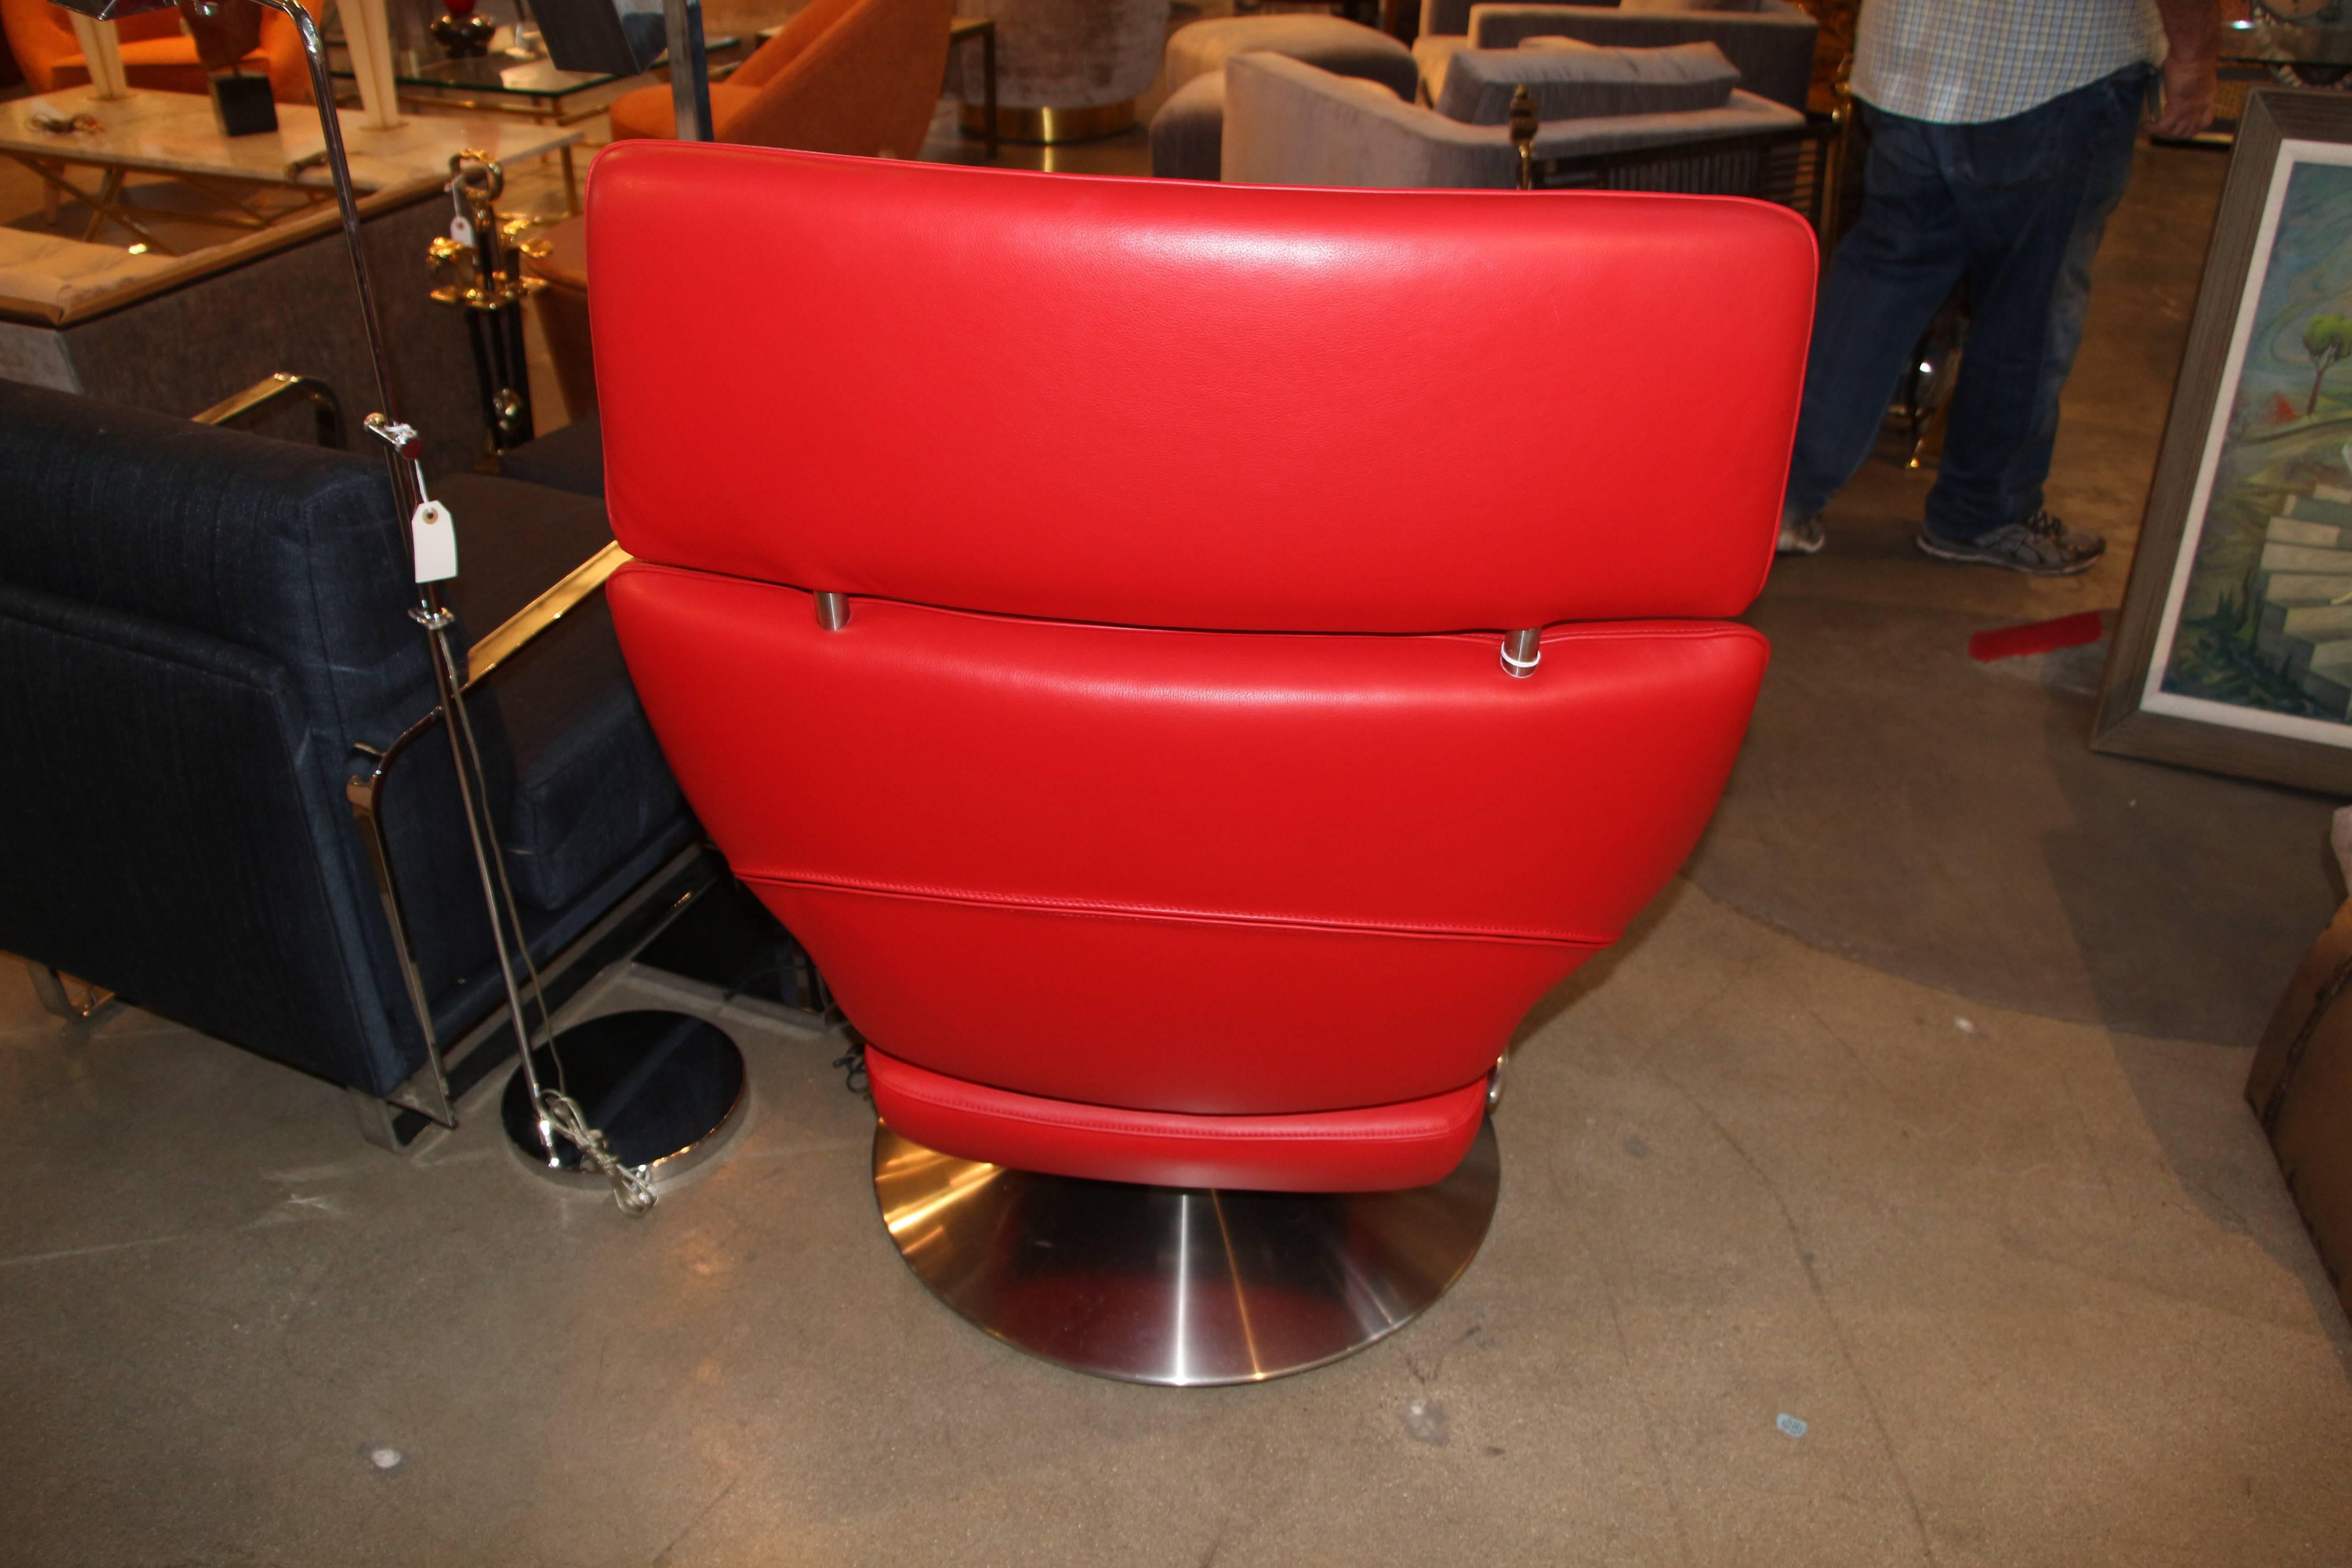 A beautiful red leather recliner with a blue oval Desede tag. Believe it is model DS-255. De Sede is an iconic Swiss firm which makes the highest quality leather furniture.